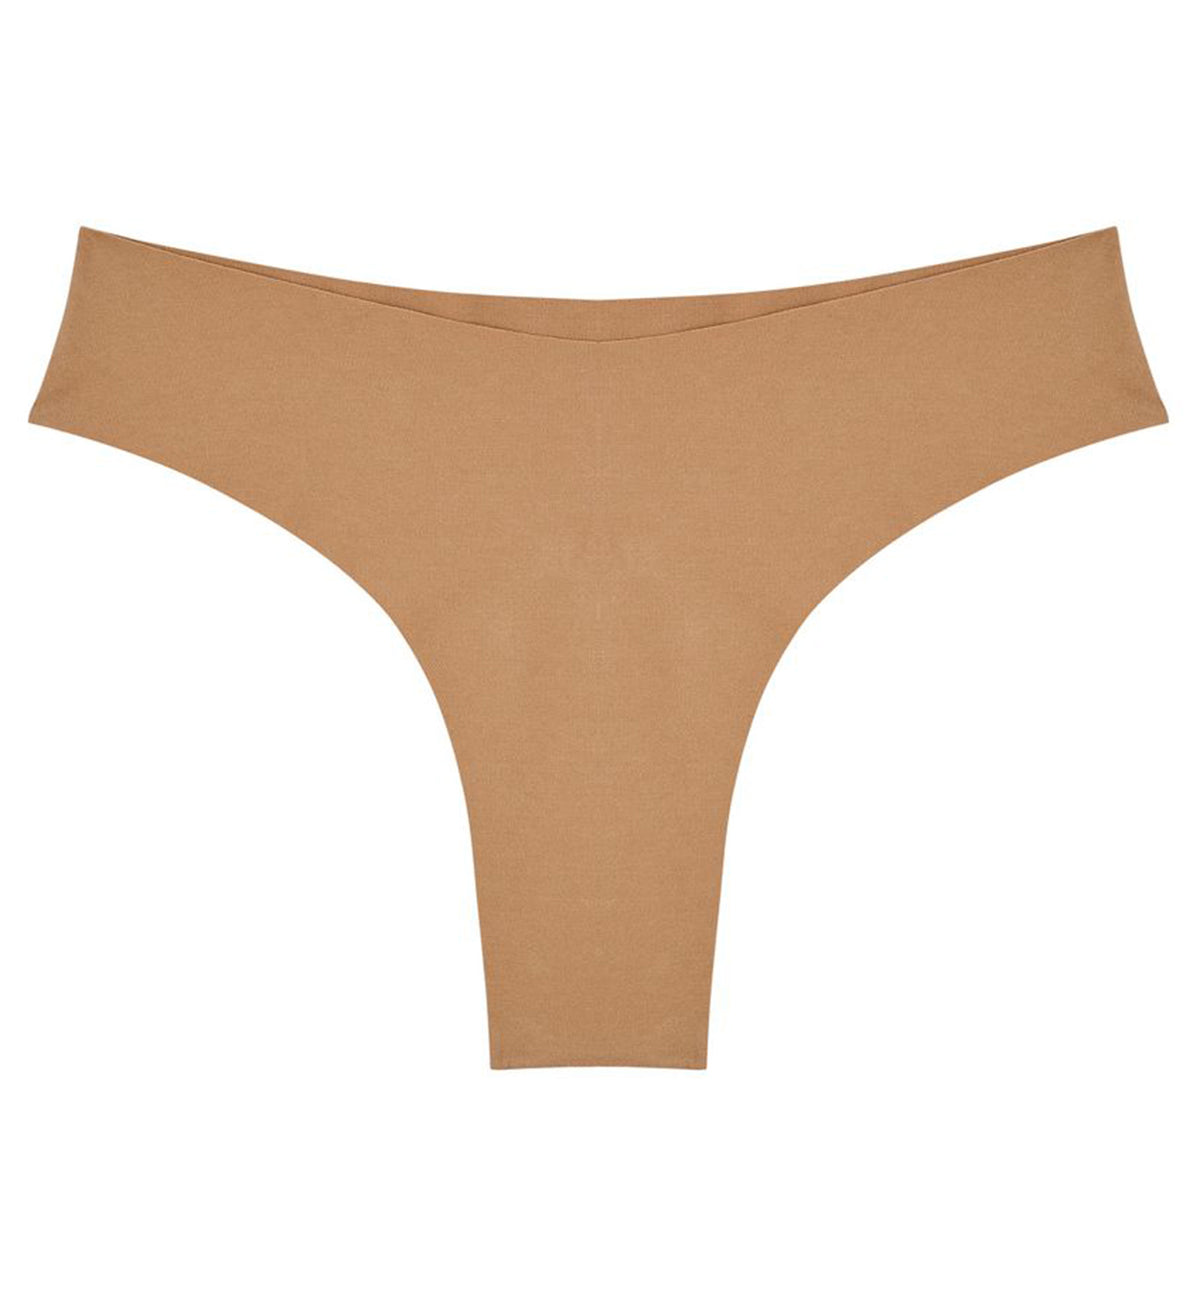 Panty Promise Low Rise Thong,XS,Sand - Sand,XS